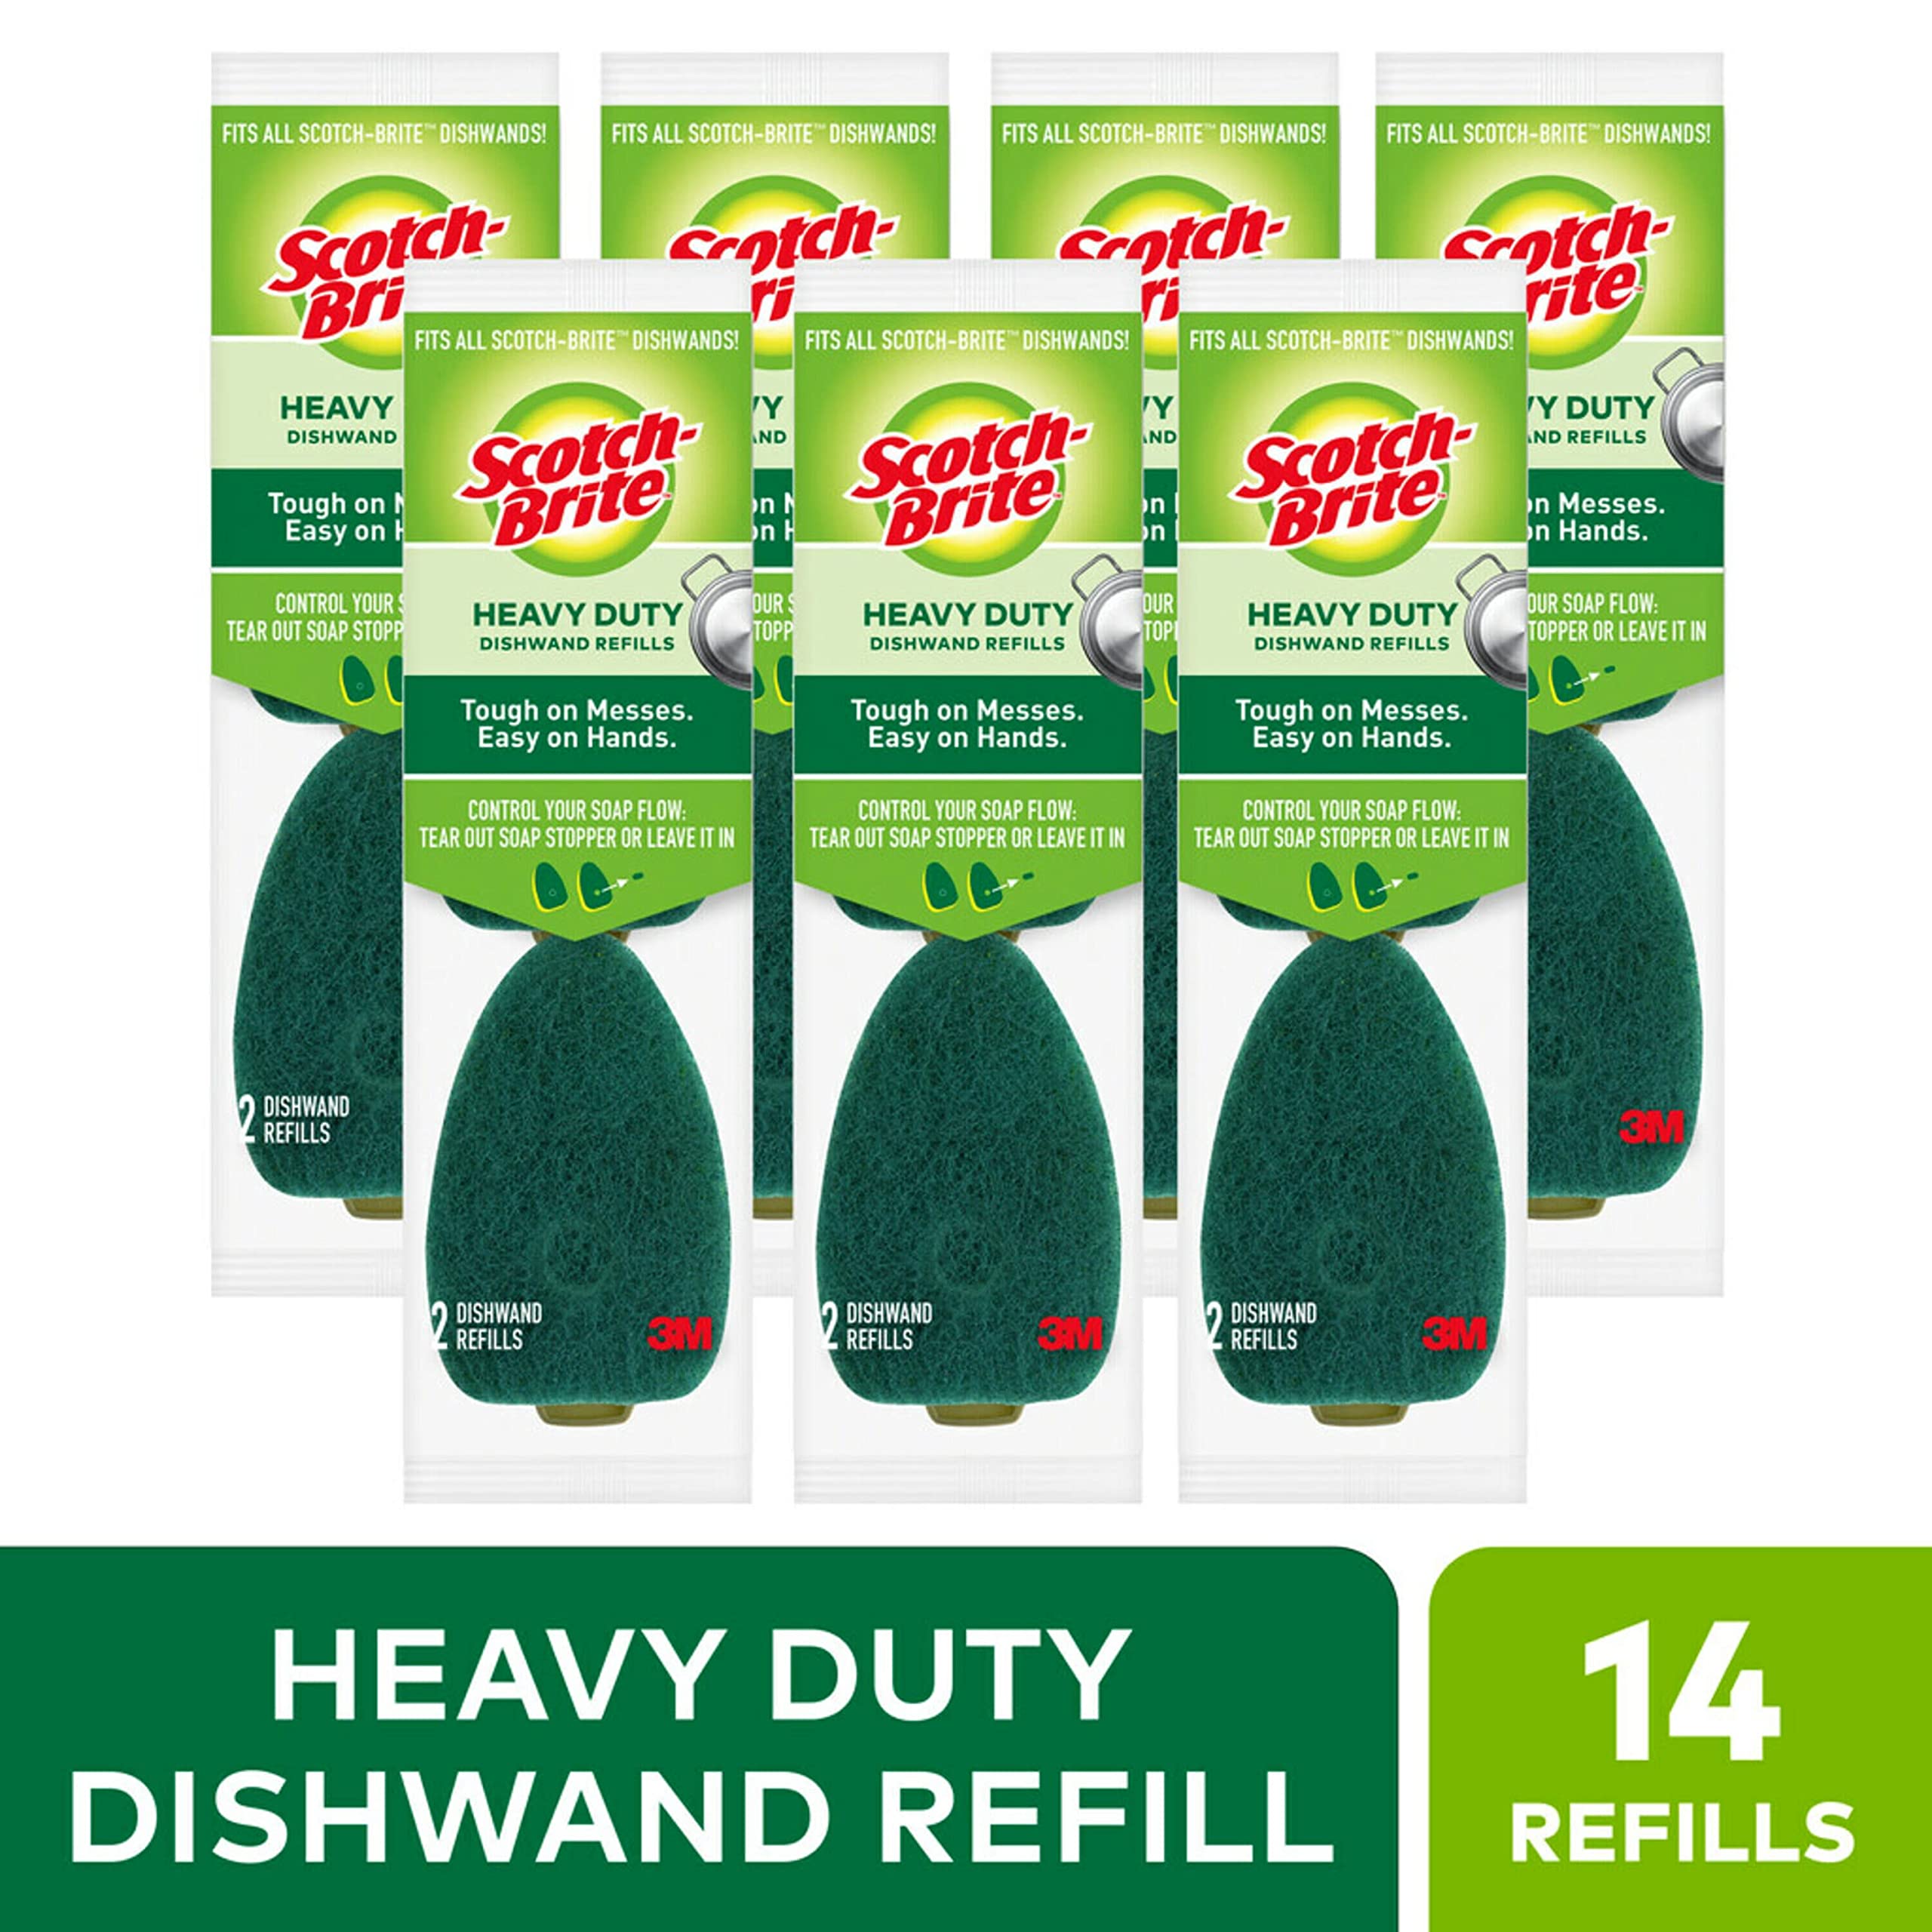 Scotch-Brite Heavy Duty Dishwand Refills, Keep Your Hands Out of Dirty Water, 2 Refills